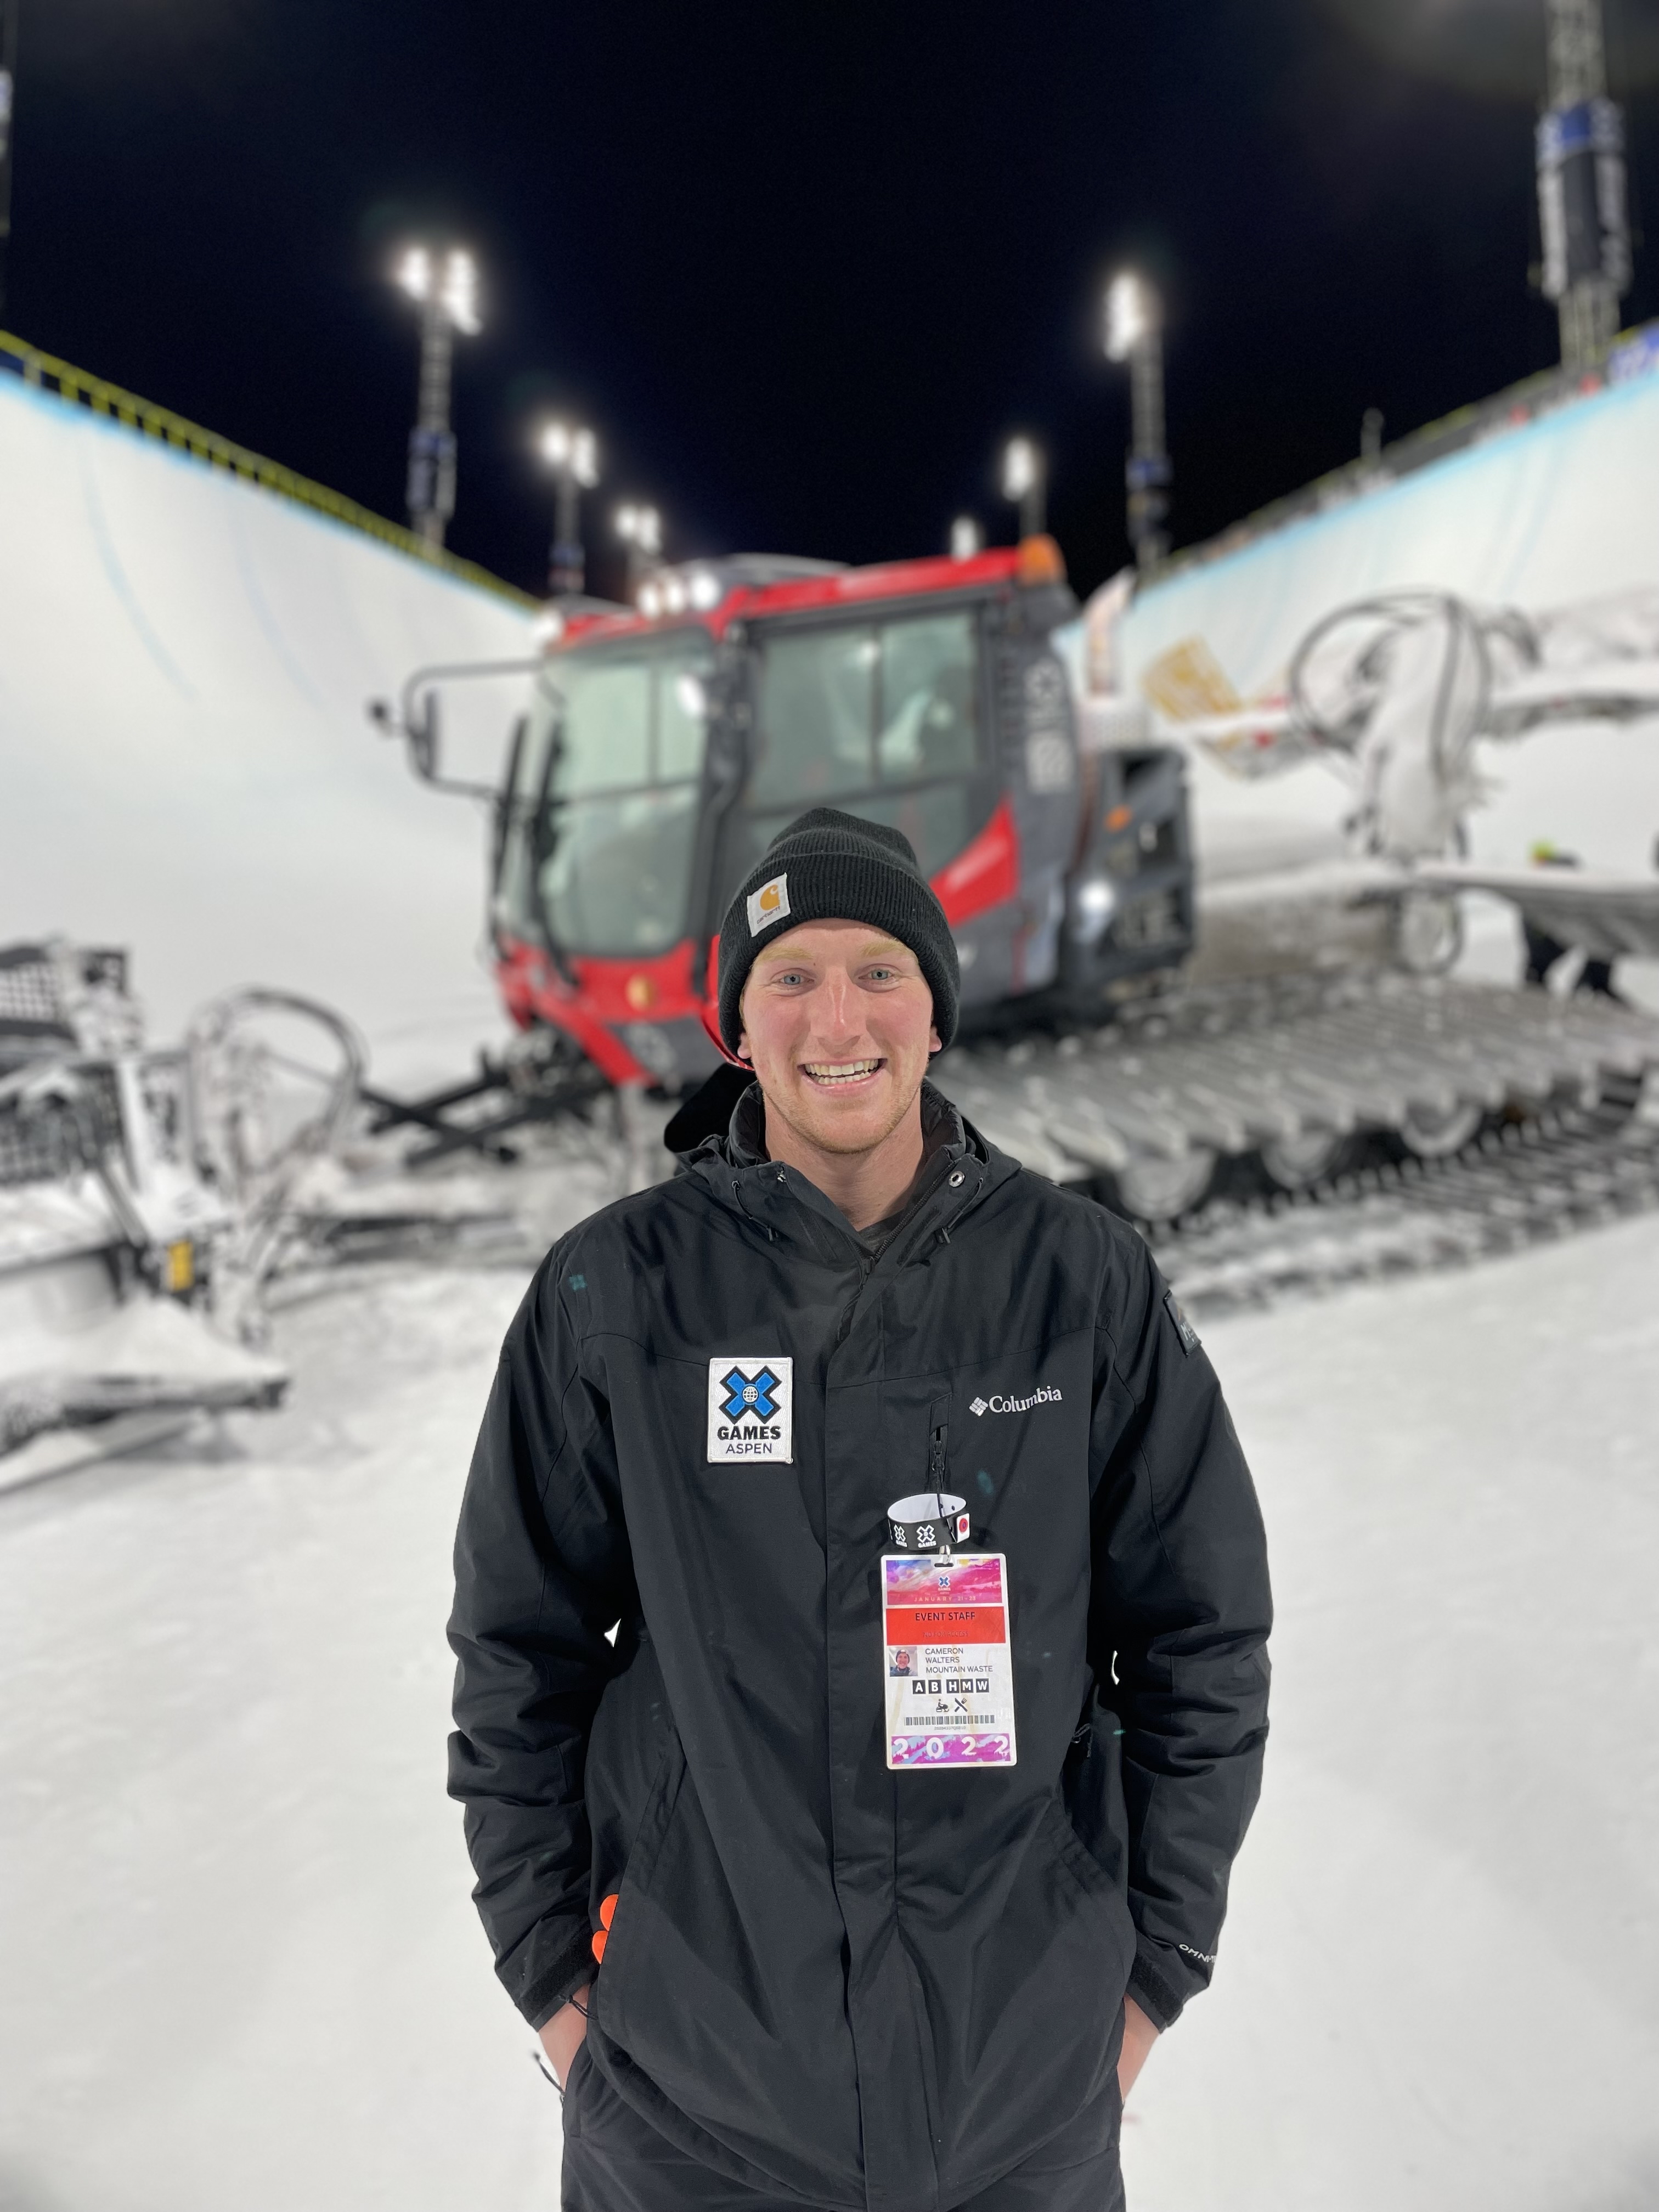 While I was a student, I got the opportunity to work at the X Games in Aspen!